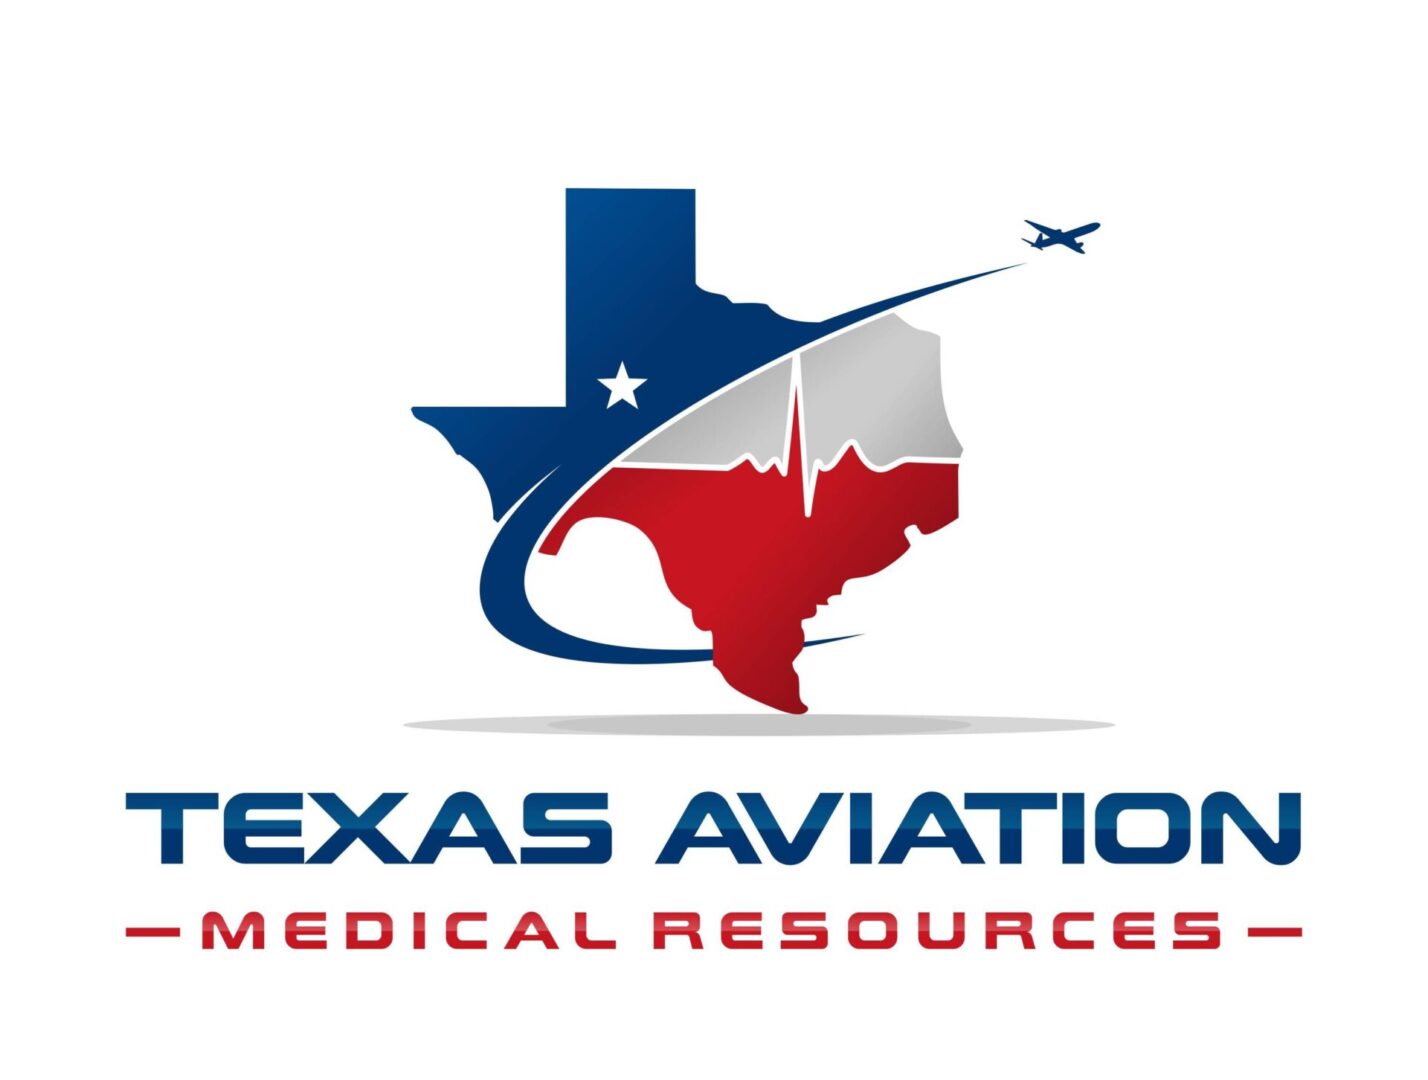 A logo of texas aviation medical resources